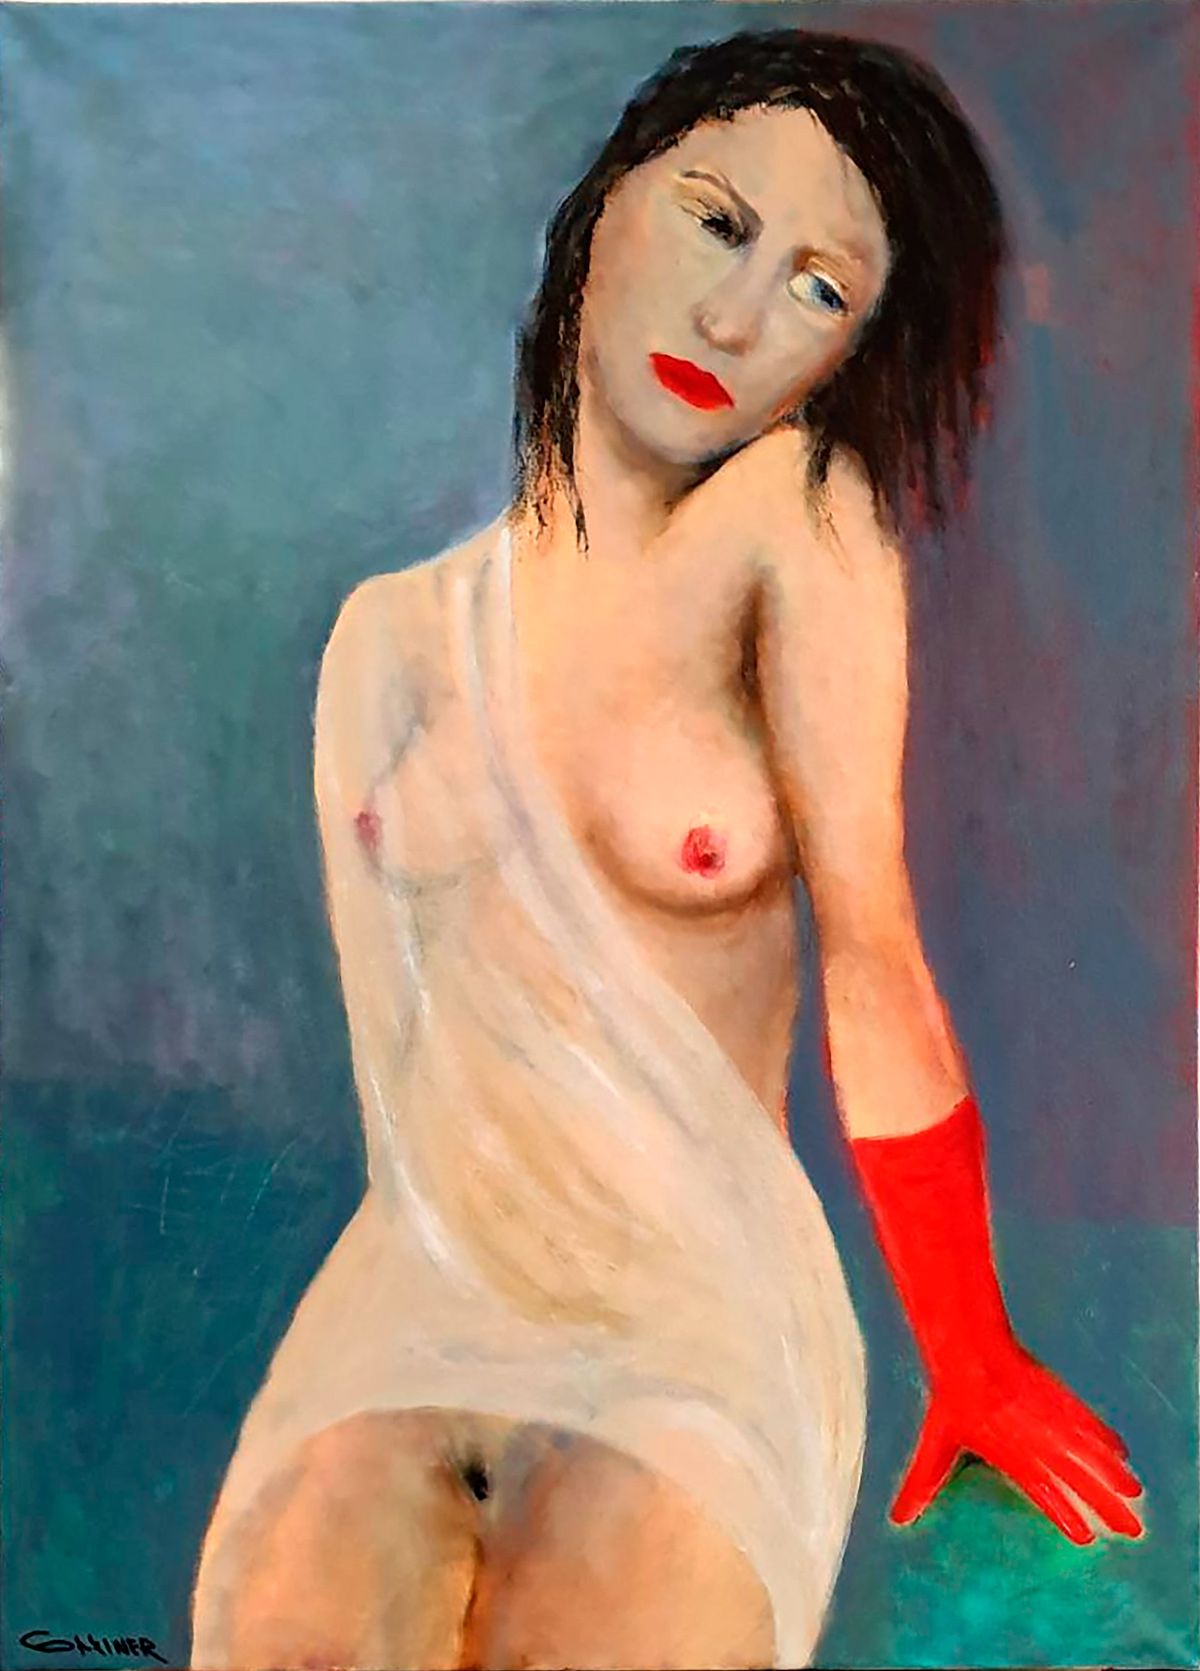 Red glove as a symbol of lust. Tired but not defeated. Oil on canvas